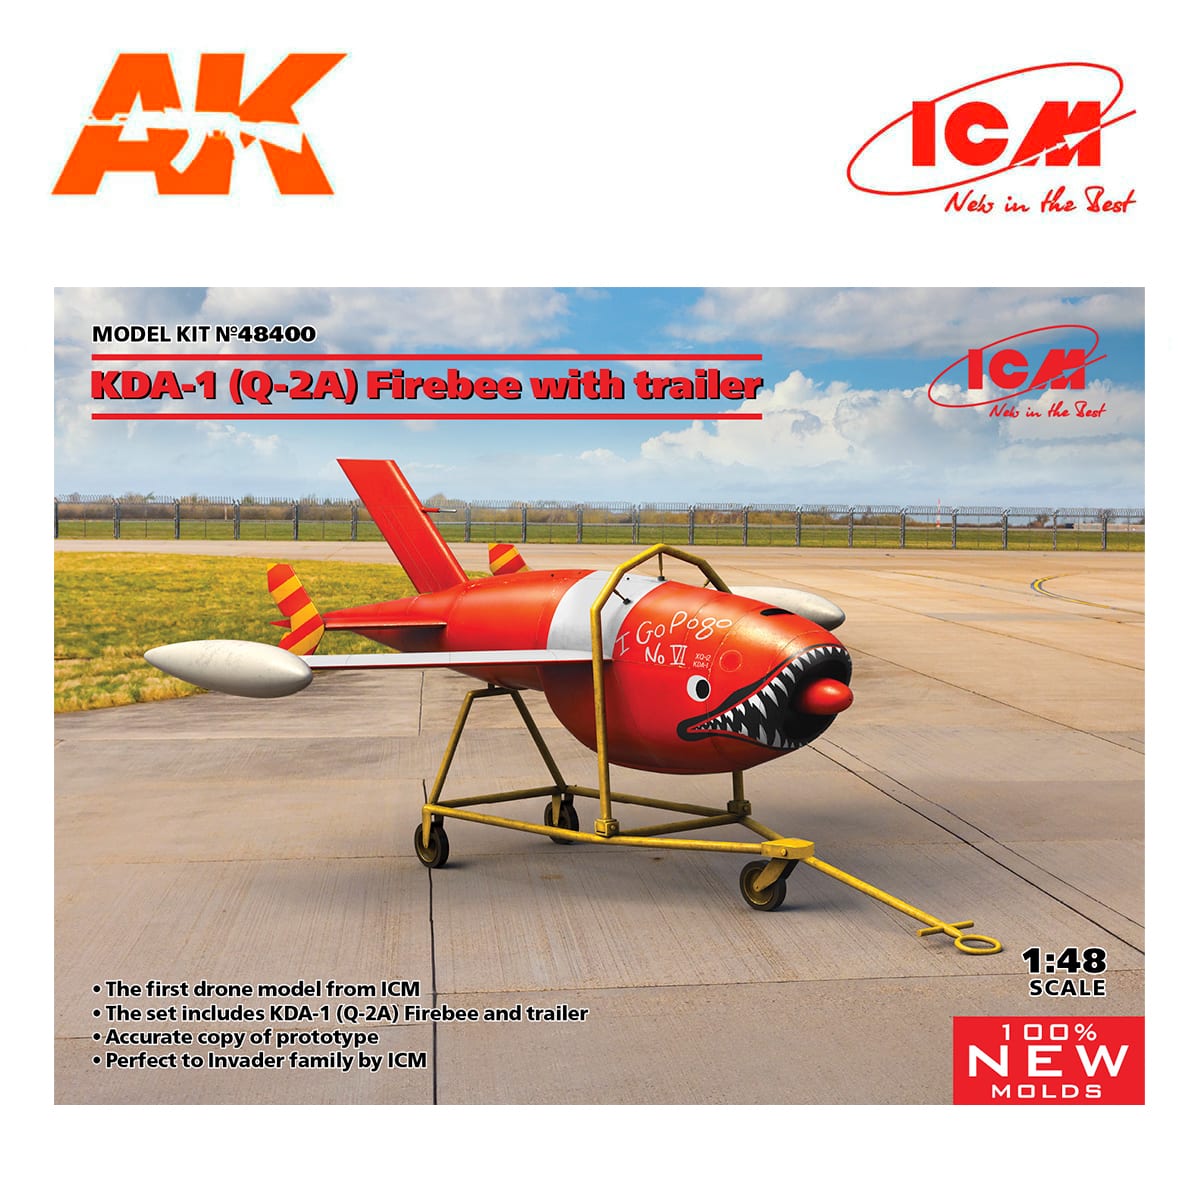 Q-2A (KDA-1) Firebee with trailer (1 airplane and trailer) 1/48